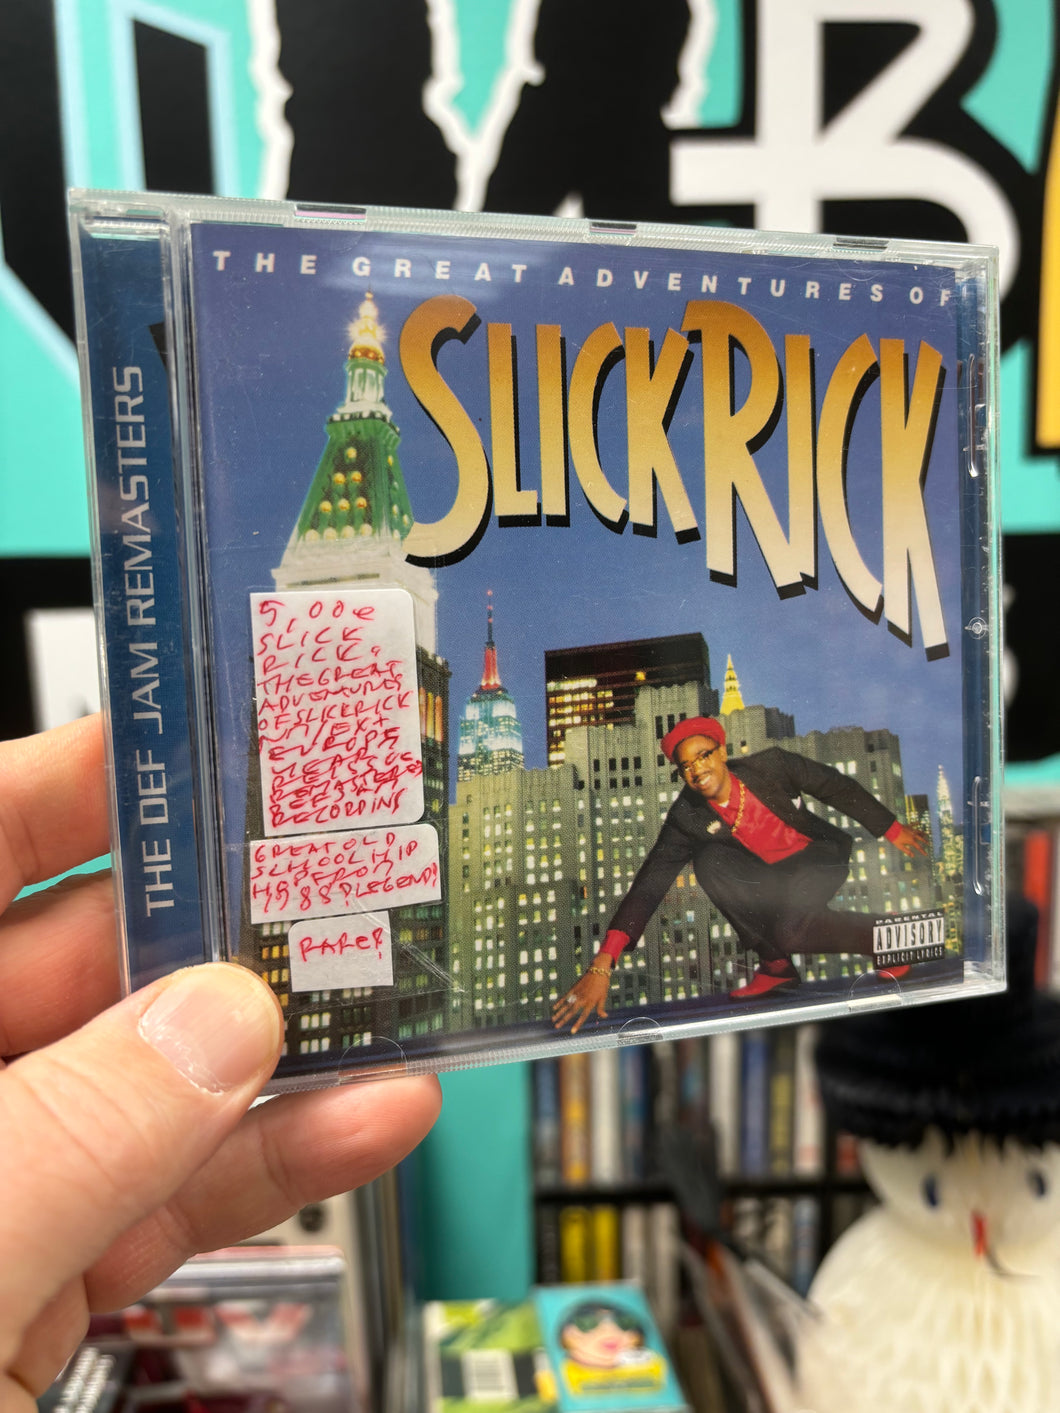 Slick Rick: The Great Adventures Of Slick Rick, CD, reissue, remastered, Europe year?